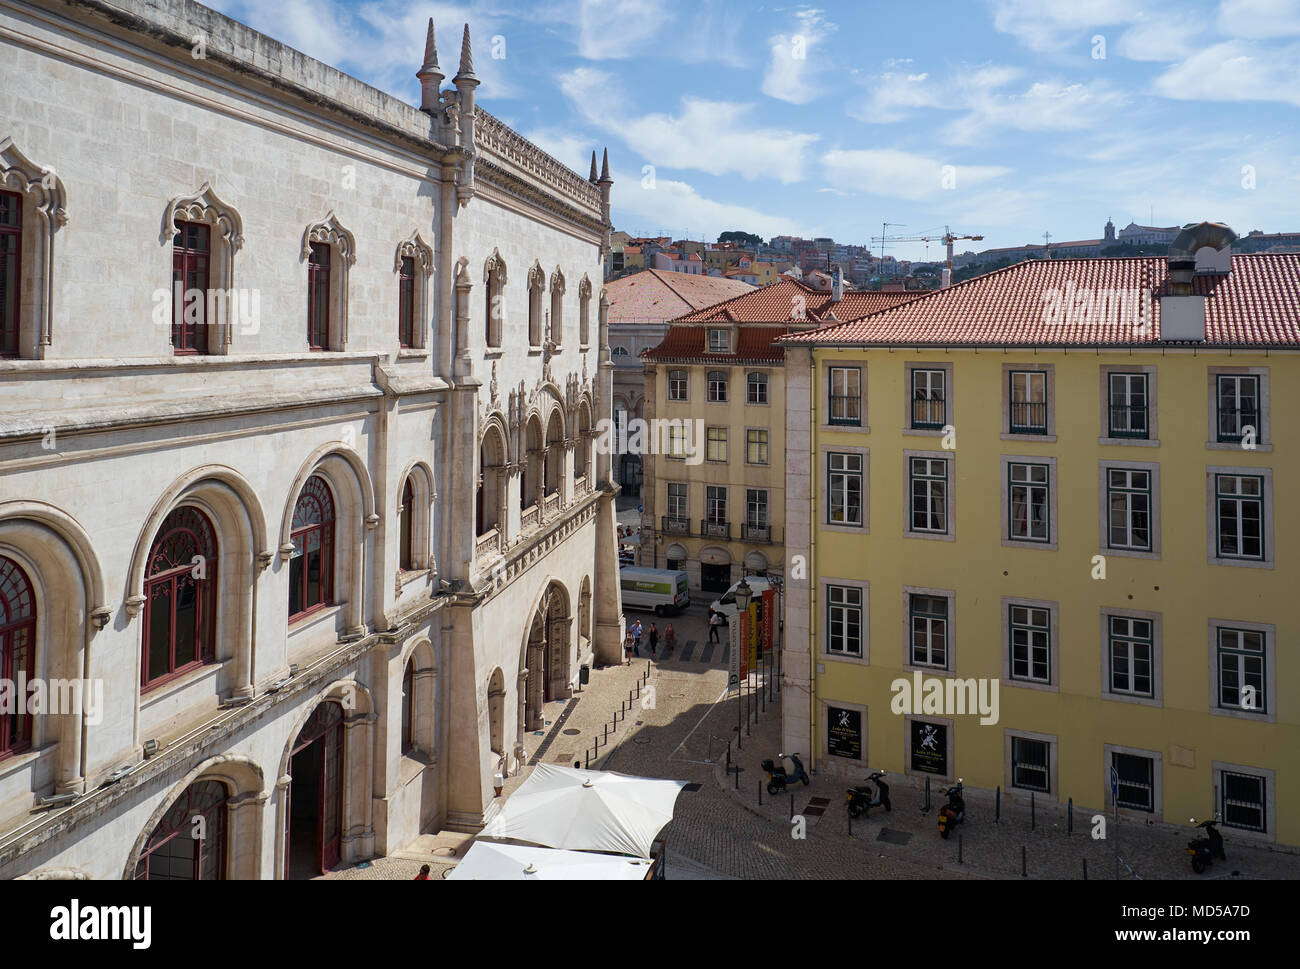 LISBON, PORTUGAL - JUNE 25, 2016:  Largo do Duque de Cadaval street as seen from the entrance to the Rossio train station. Lisbon. Portugal Stock Photo